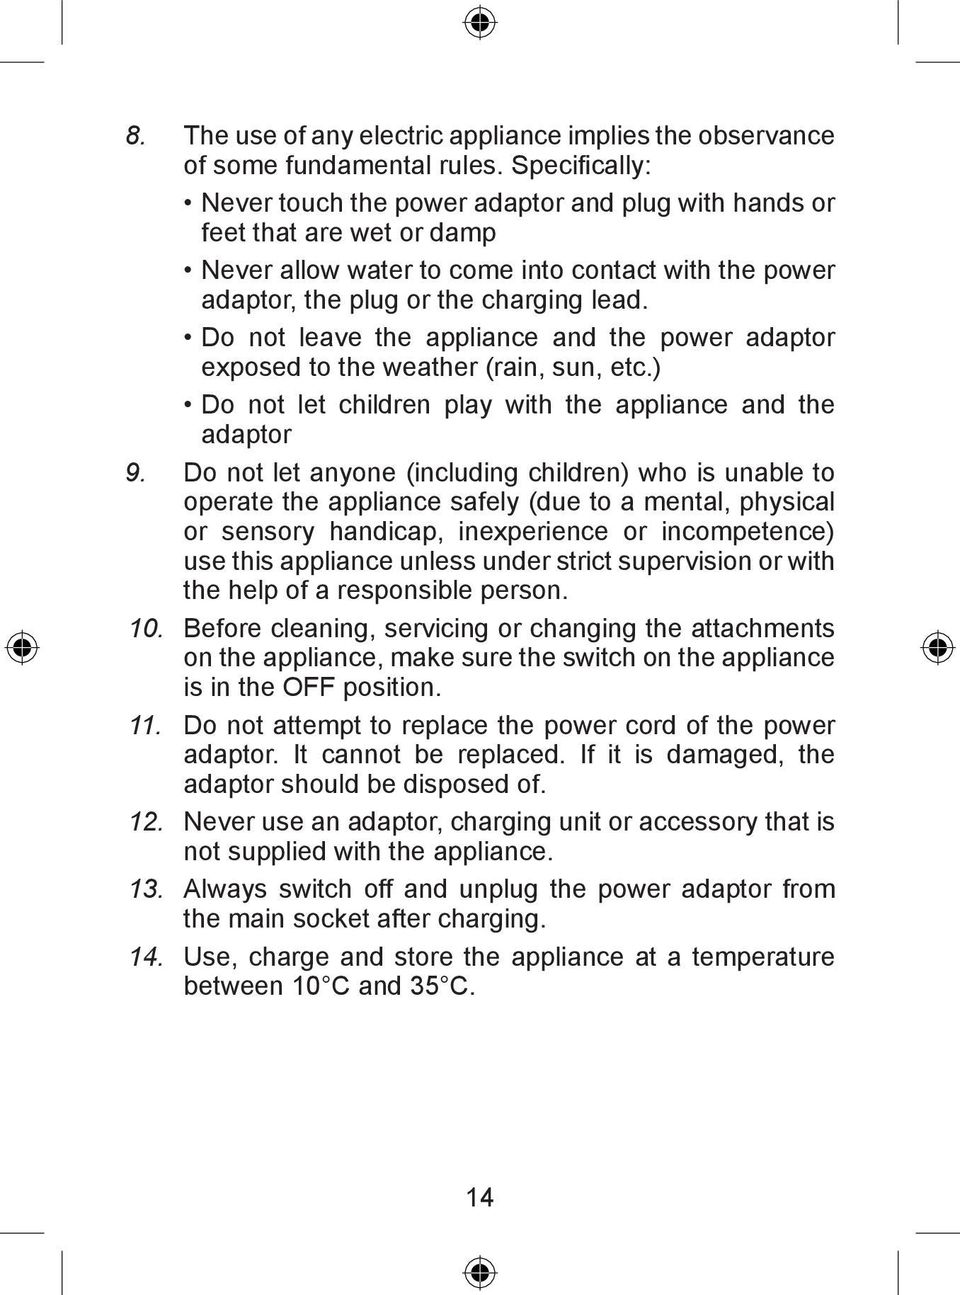 Do not leave the appliance and the power adaptor exposed to the weather (rain, sun, etc.) Do not let children play with the appliance and the adaptor 9.